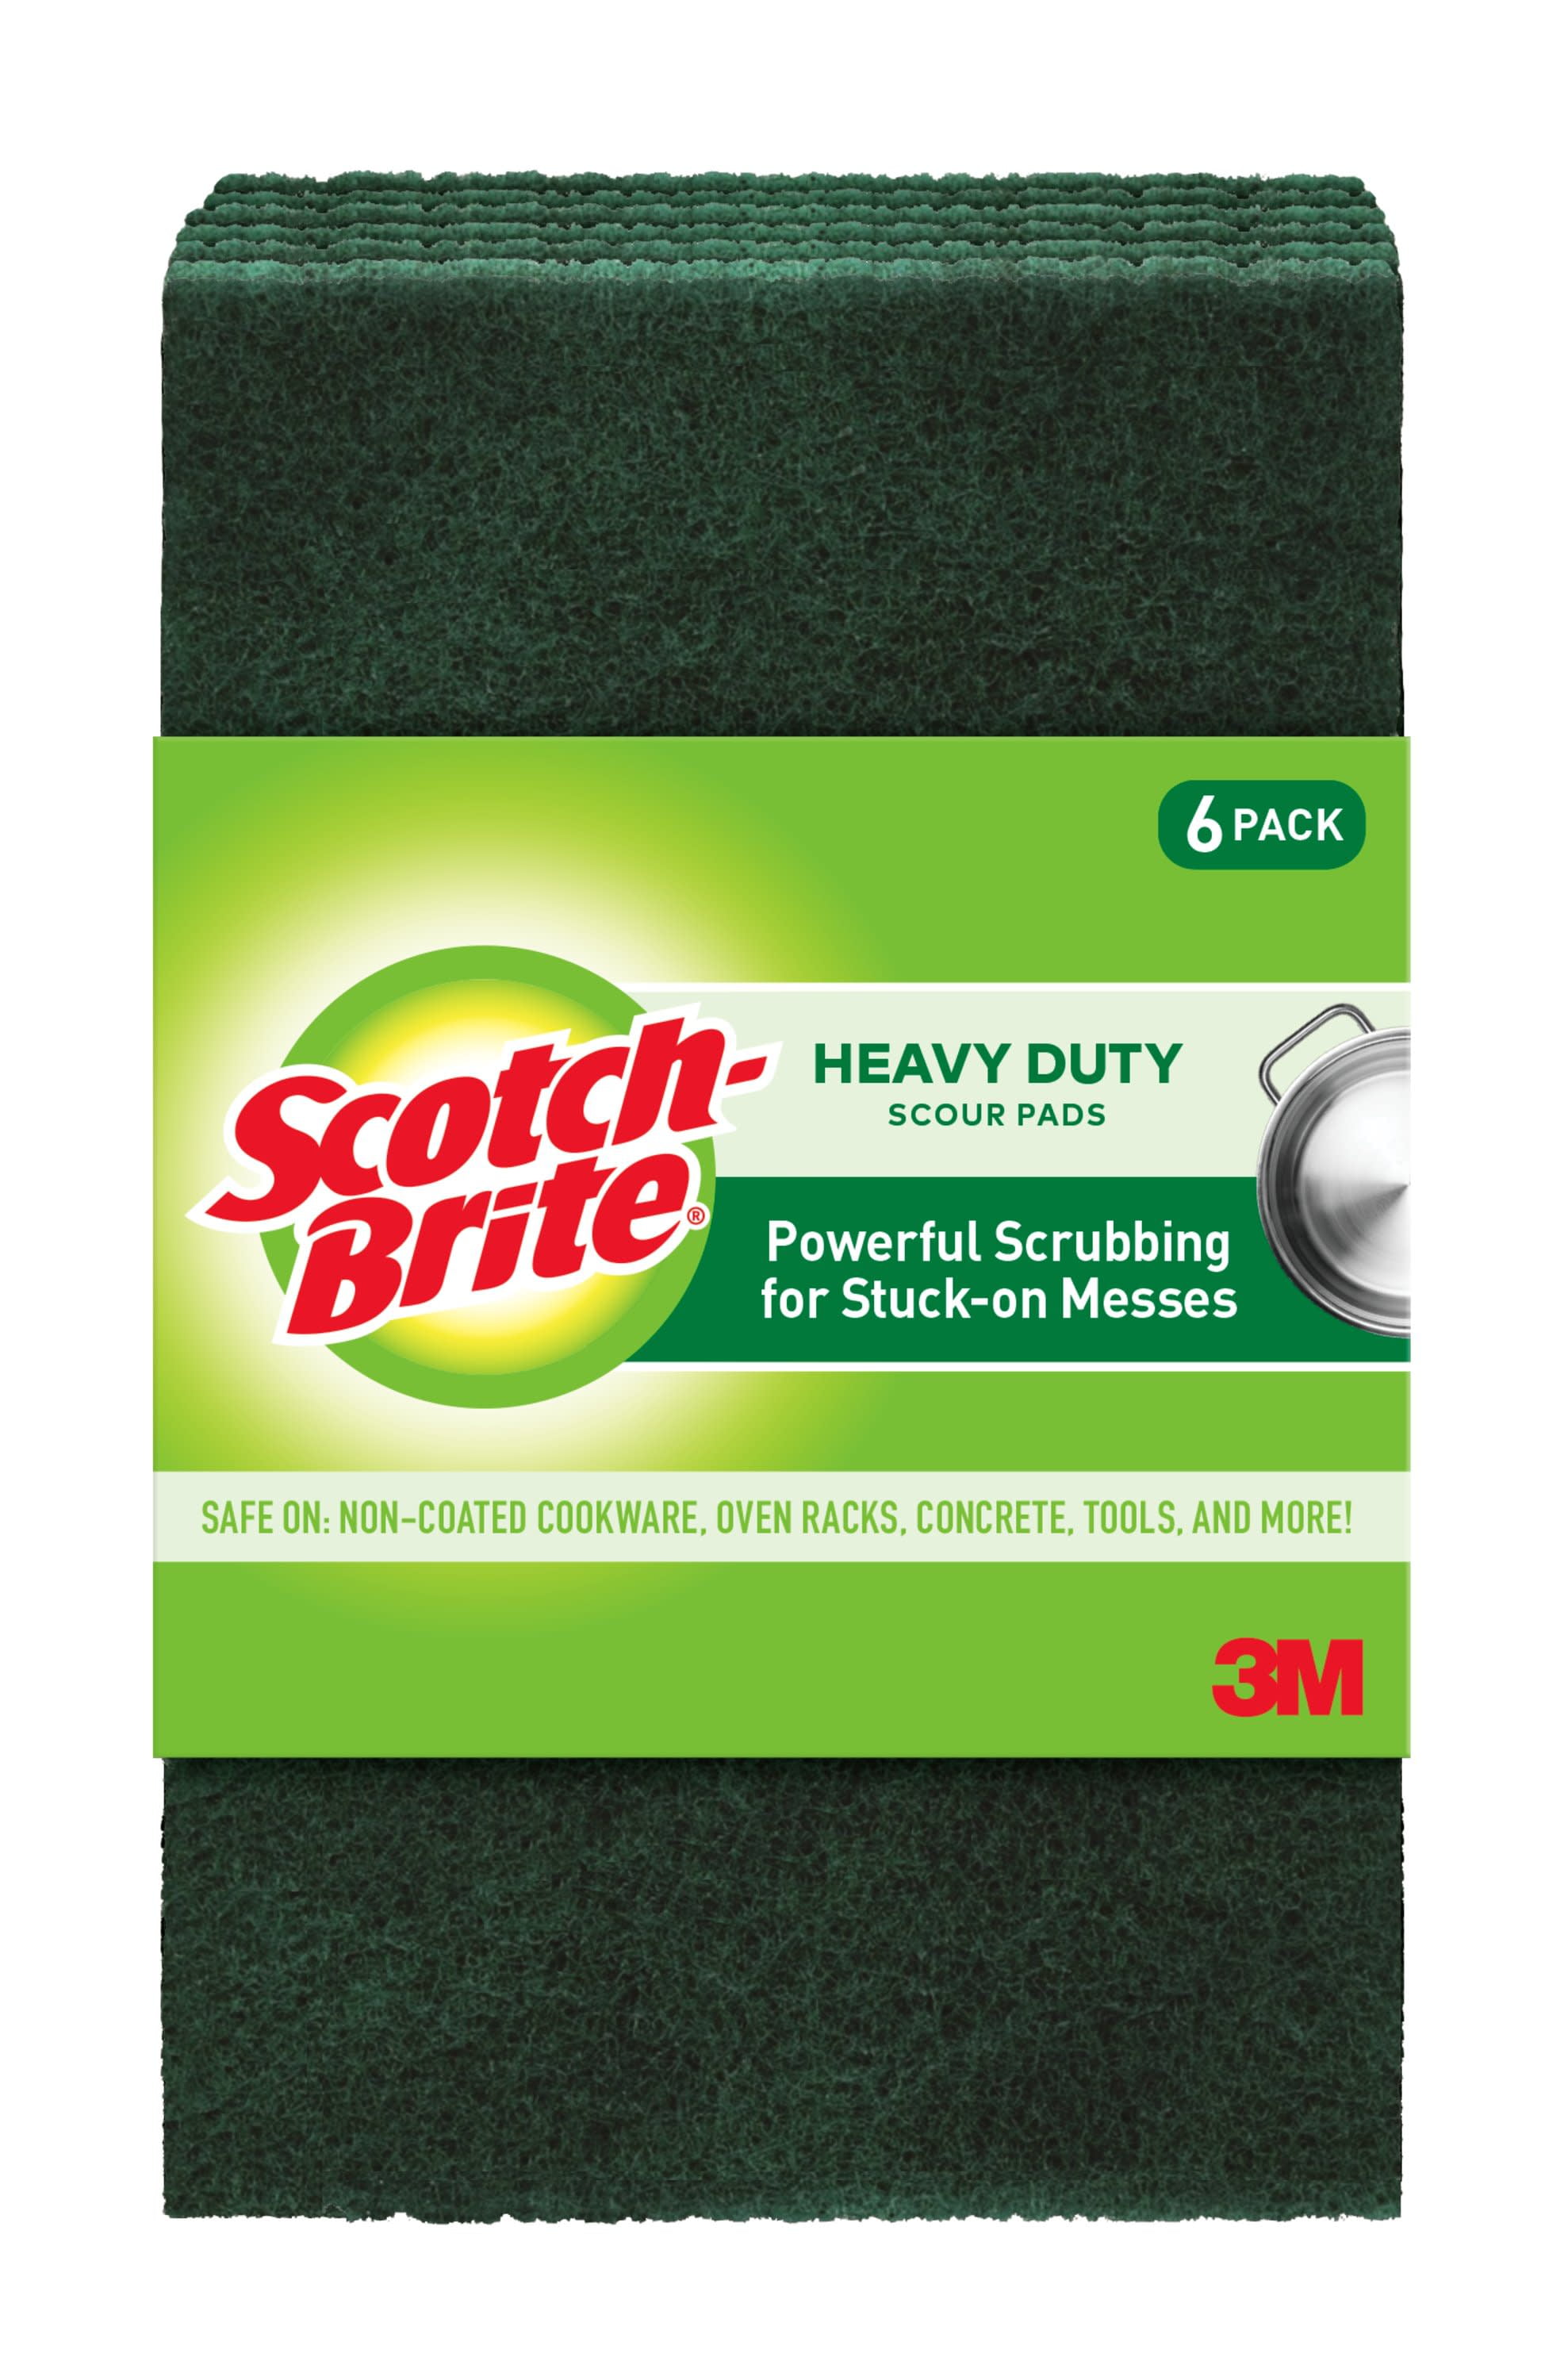 Green Scouring Pads Heavy Duty Cleaning Scrubbing Pads Scourers 